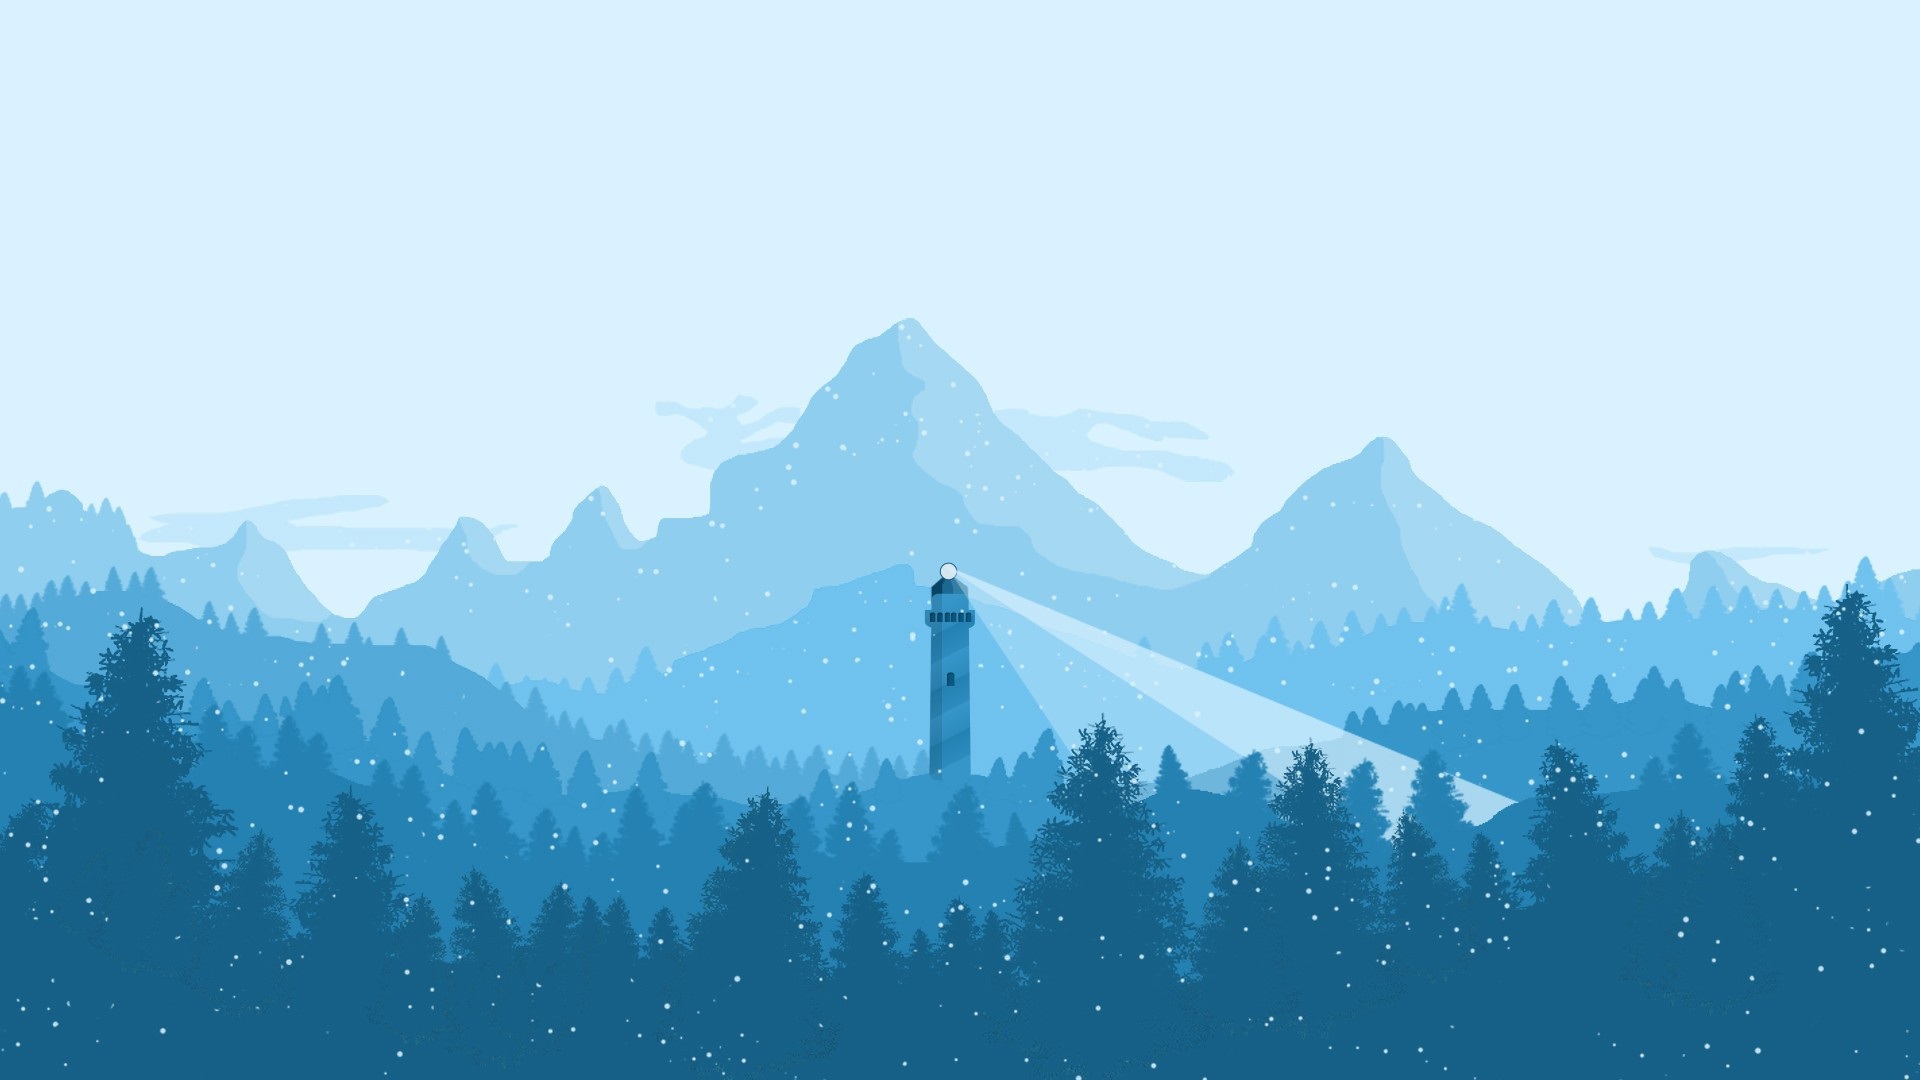 Wallpaper Mountains, trees, snowy, lighthouse, winter, art picture 1920x1080 Full HD 2K Picture, Image